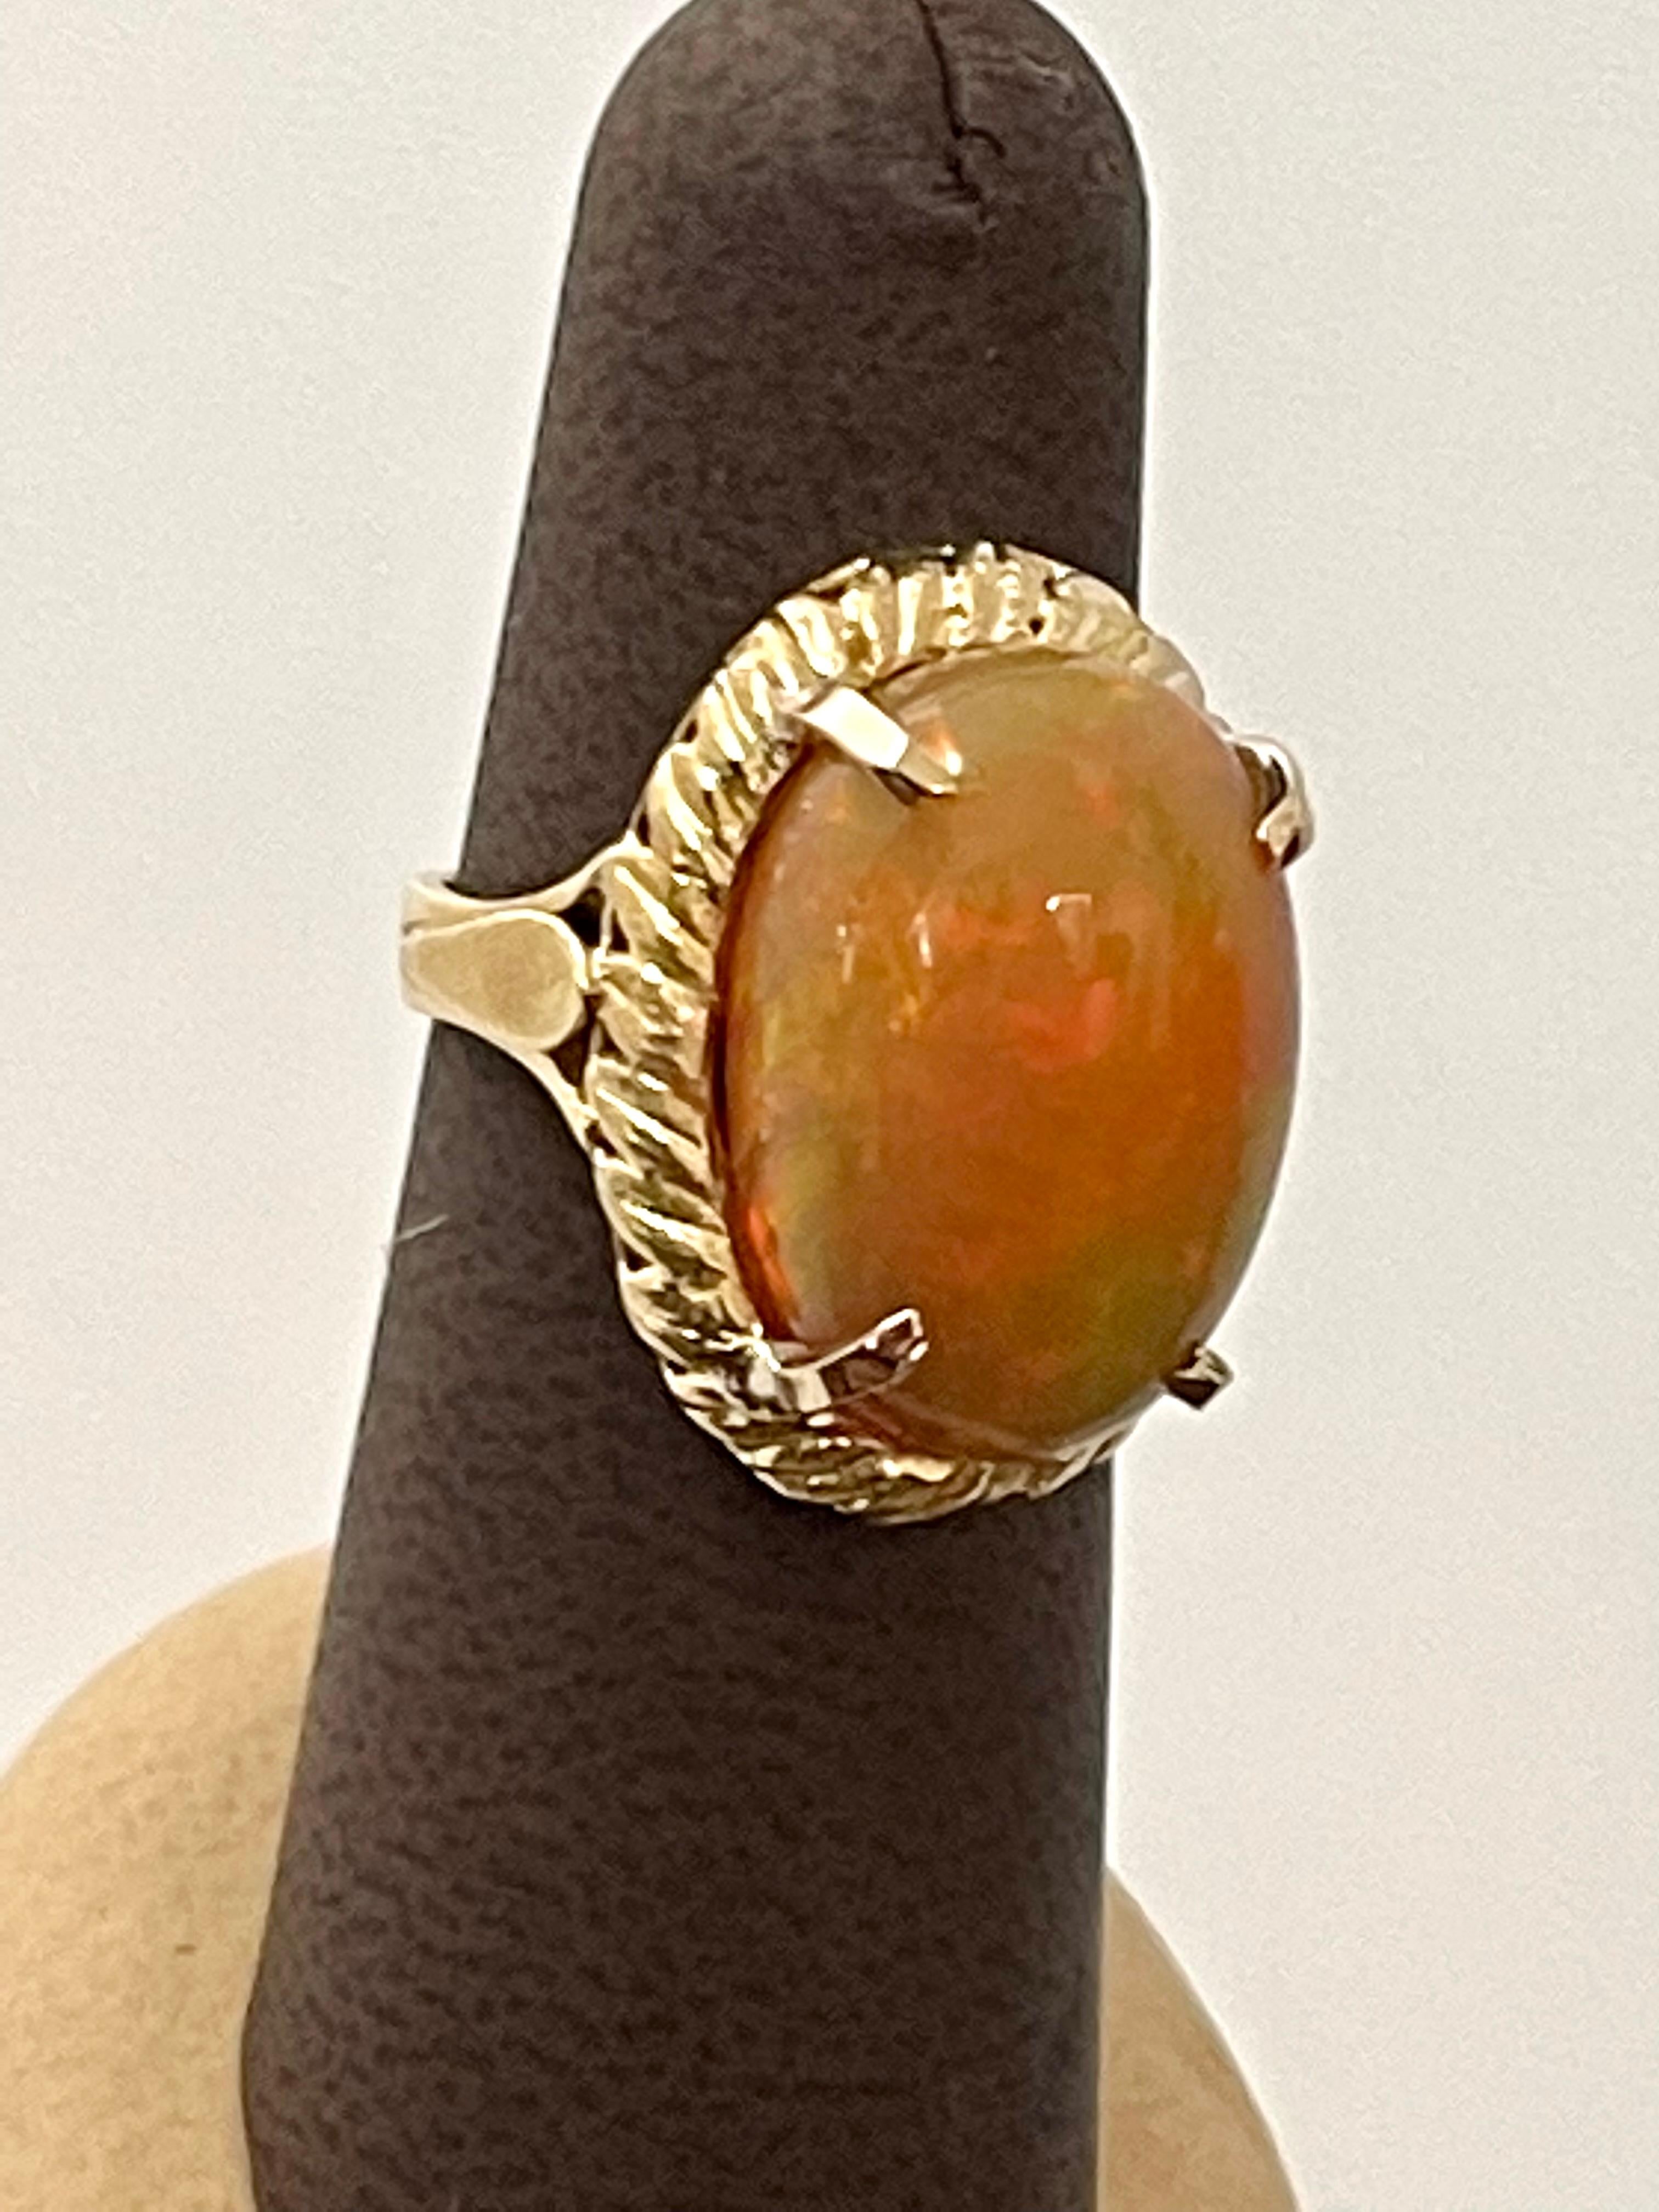 14 Carat Oval Shape Ethiopian Opal Cocktail Ring 14 Karat Yellow Gold Solid Ring For Sale 9